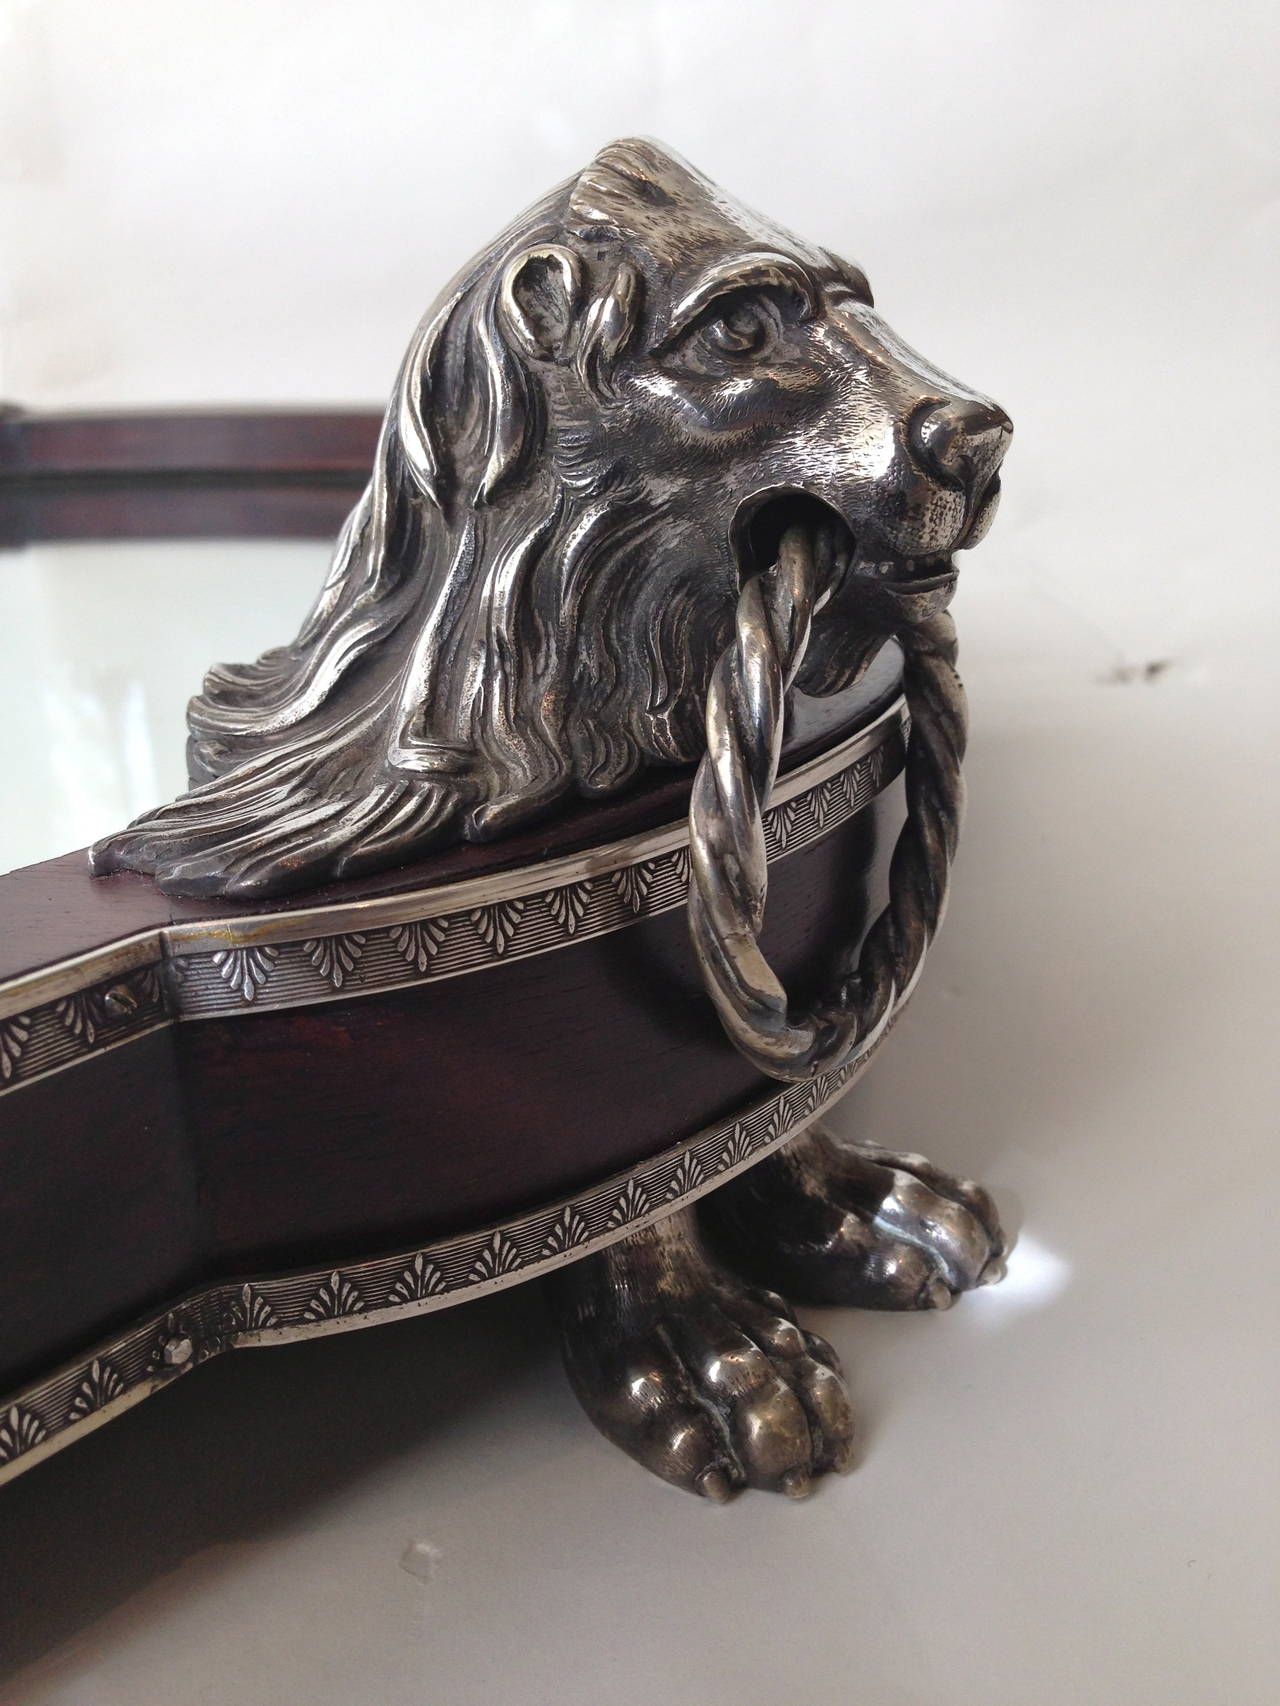 Very rare and unusual piece the lion figures silver over bronze. Nice size.
Excellent condition.